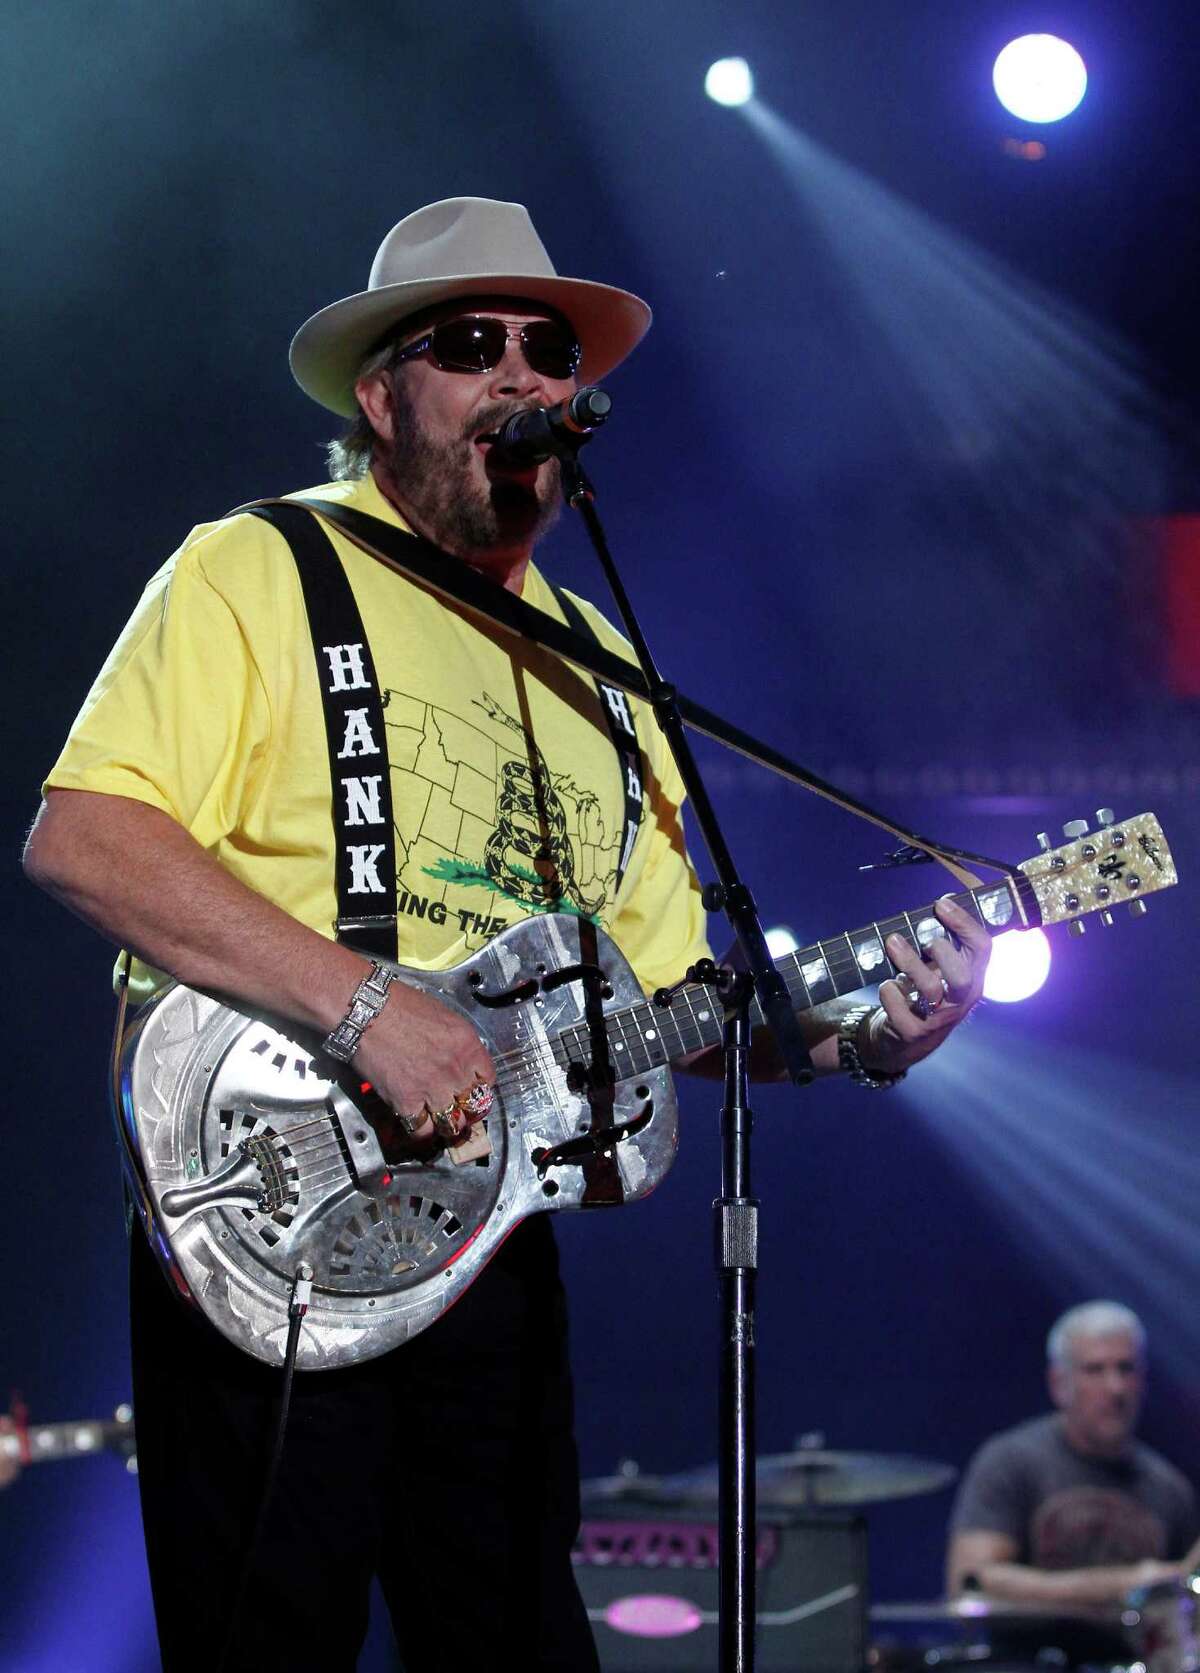 Hank Williams Jr. performs at the 2012 CMT Festival on Friday, June 8, 2012 in Nashville, Tenn. (Photo by Wade Payne/Invision/AP)